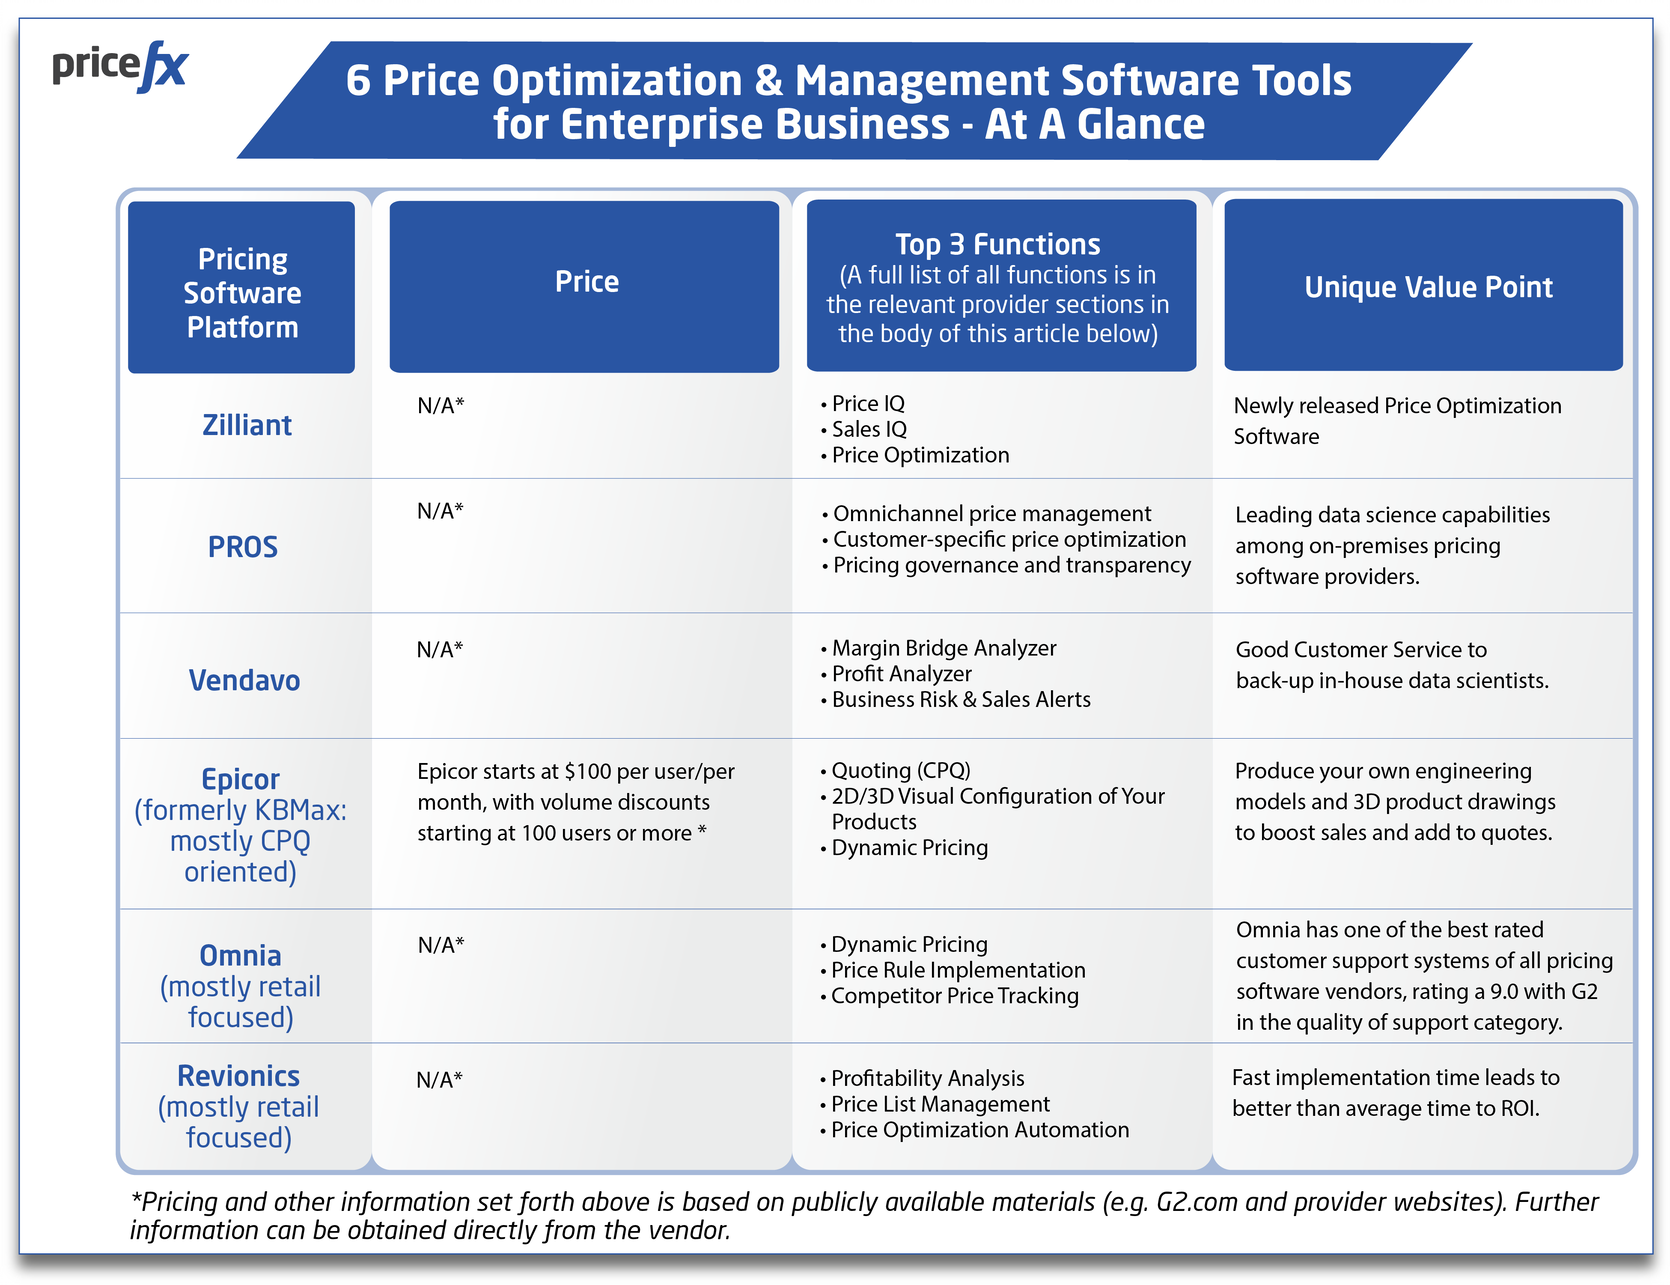 Table-6-Price-Optimization-&-Management-Tools-for-Enterprise-Businesses-At-A-Glance